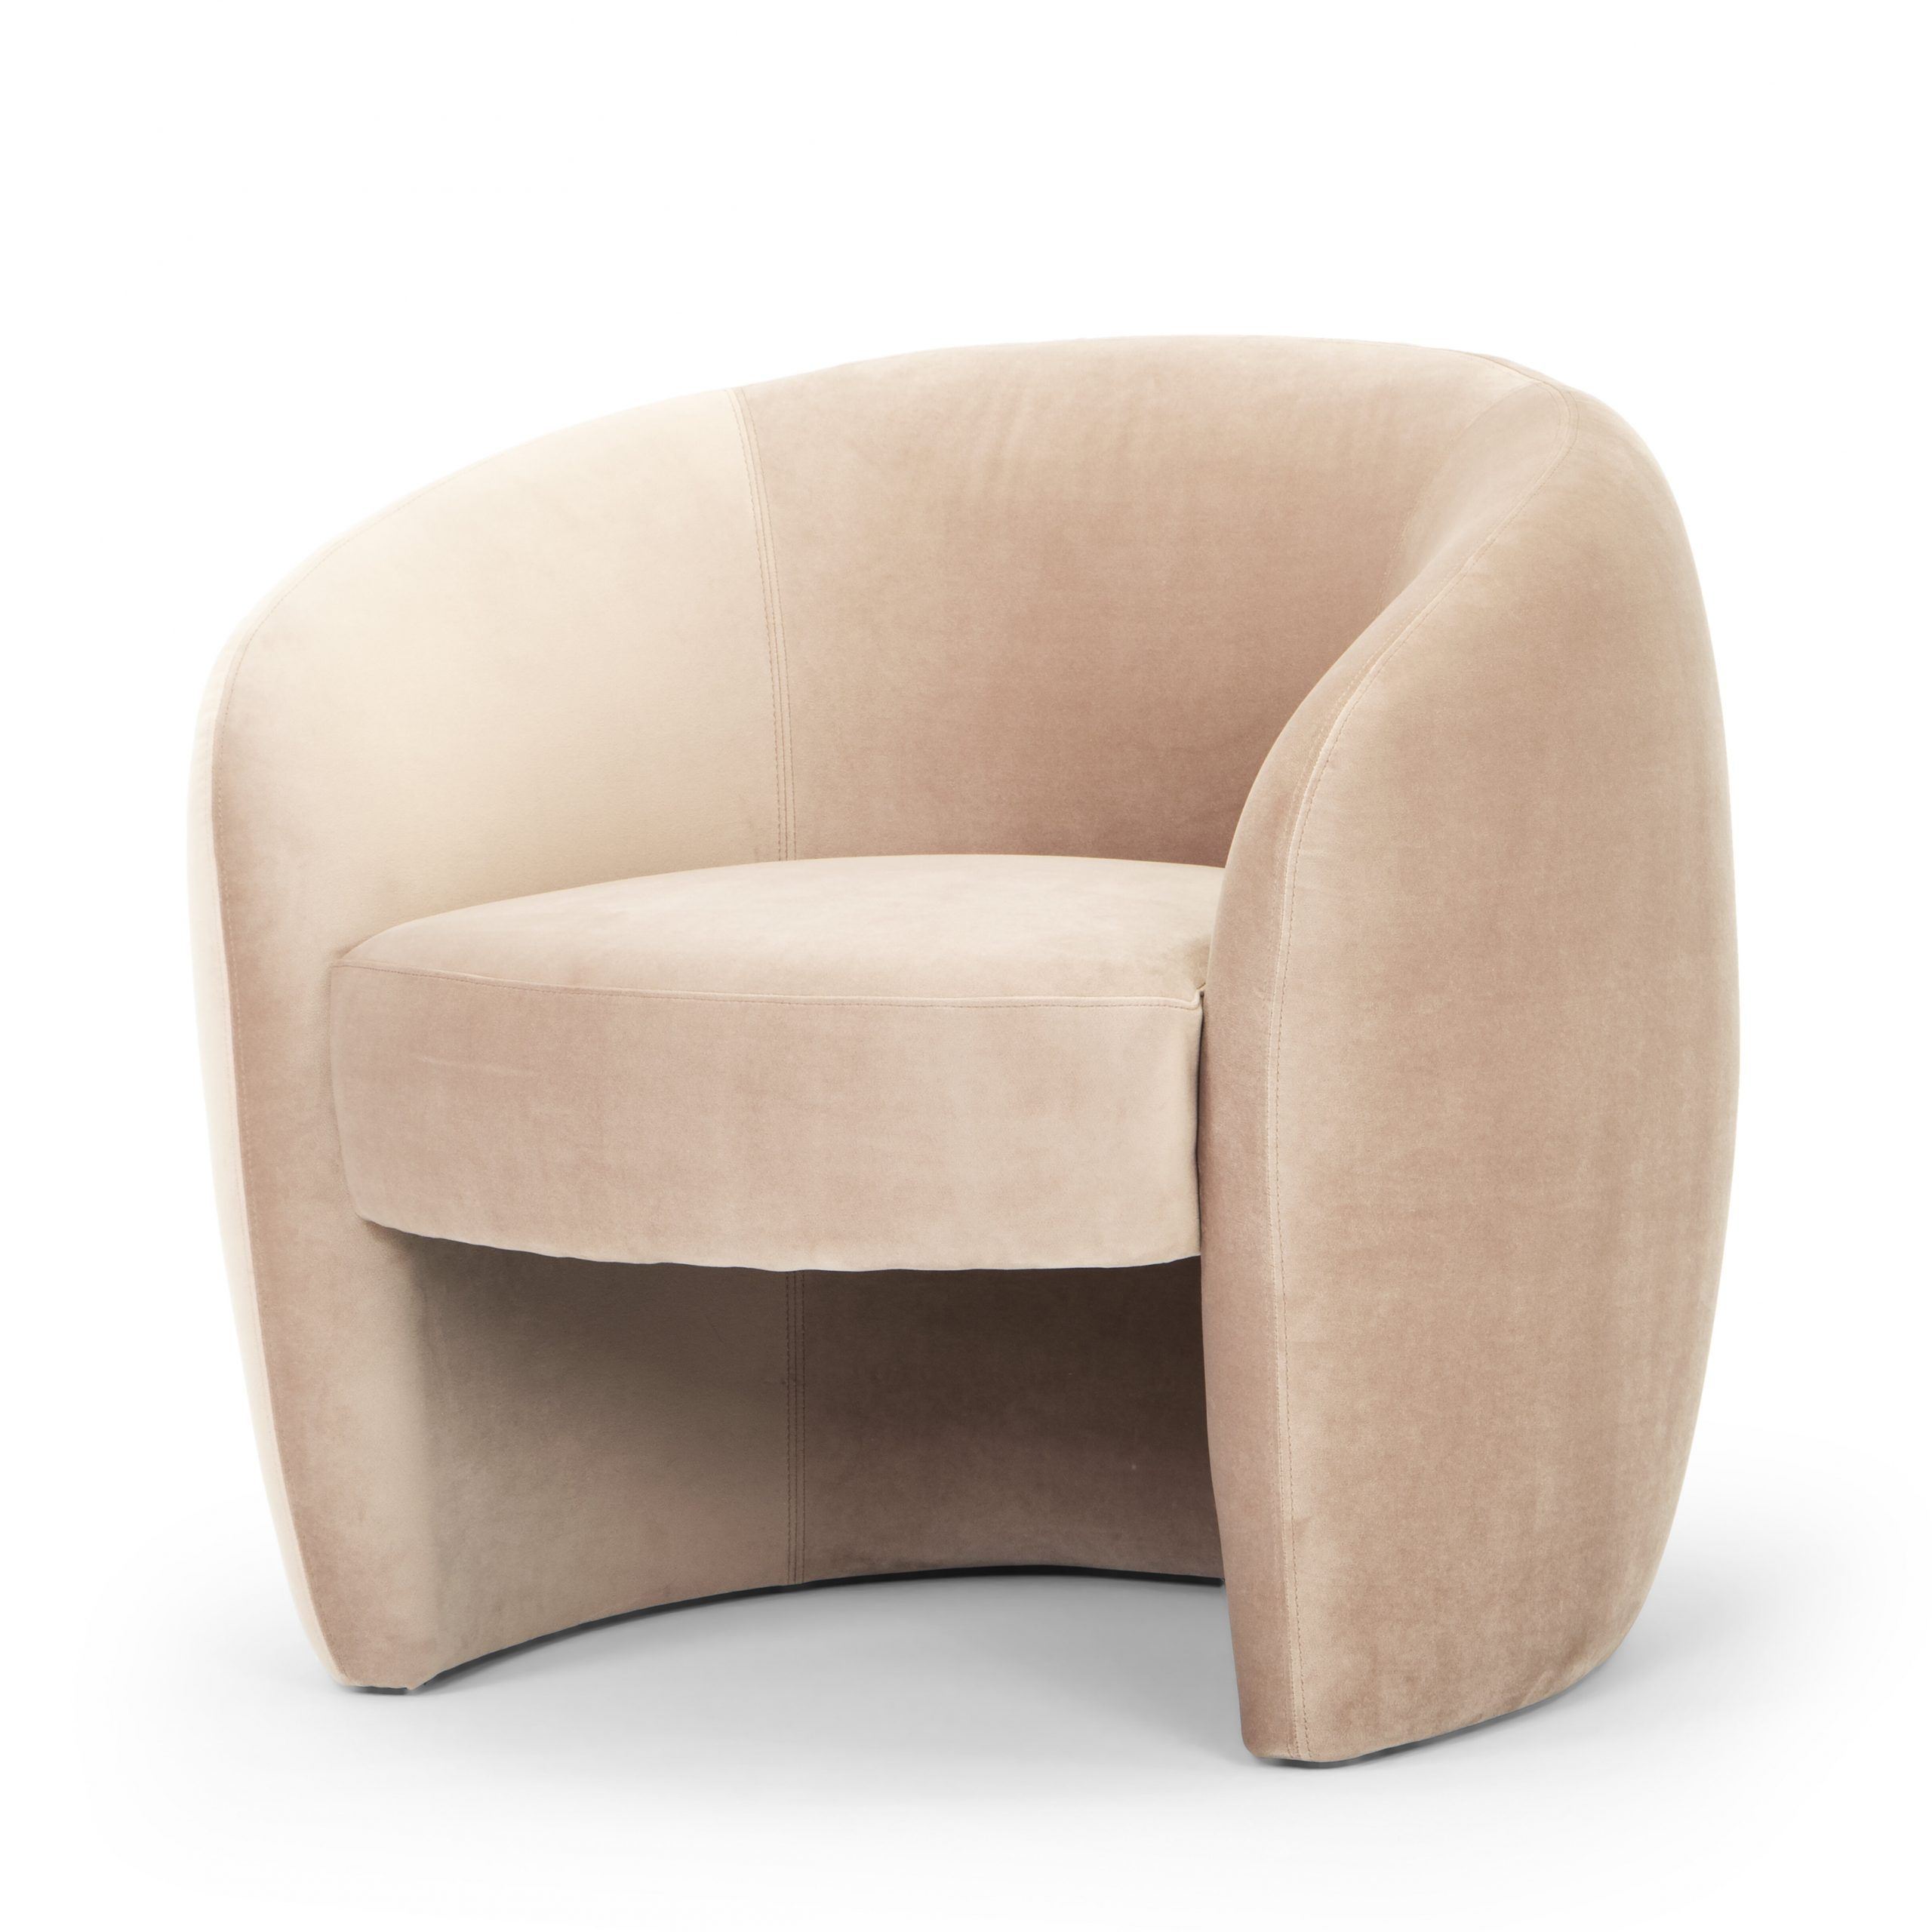 Barrel Pink Accent Chairs You'Ll Love In 2021 | Wayfair With Danny Barrel Chairs (Set Of 2) (View 5 of 15)